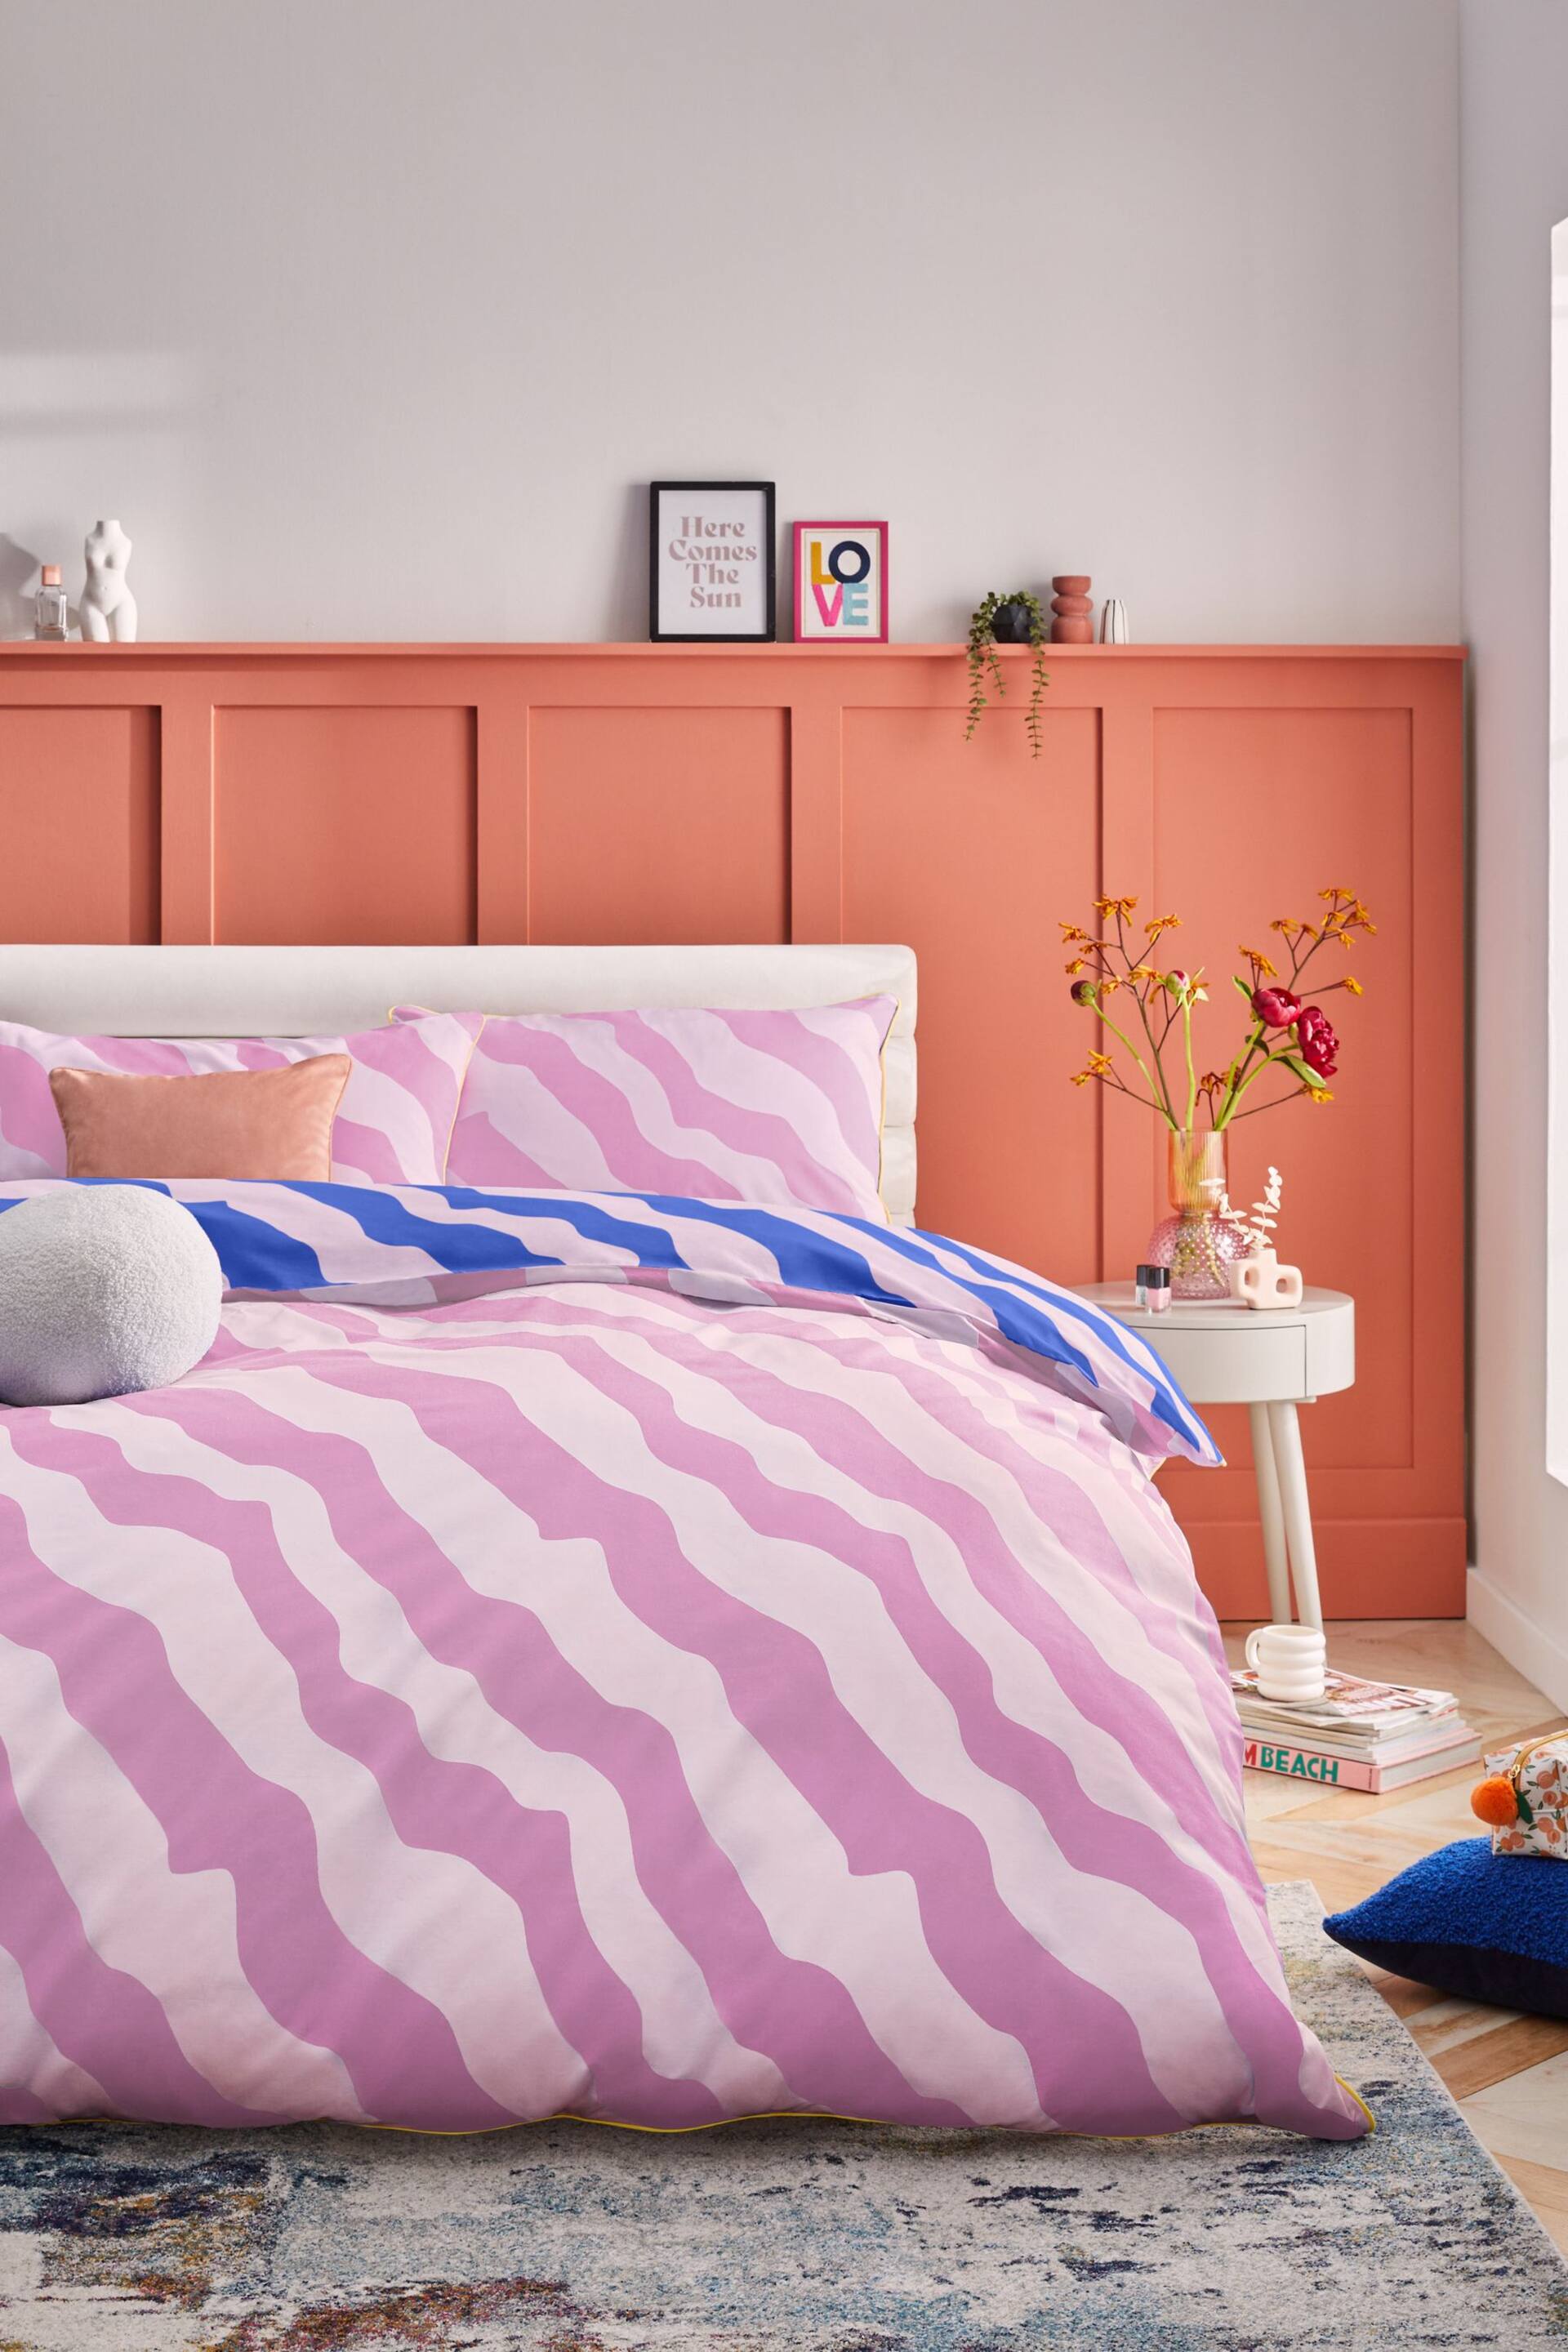 Blue/Pink Reversible Bright Wave with Pipe Edge Duvet Cover and Pillowcase Set - Image 2 of 3